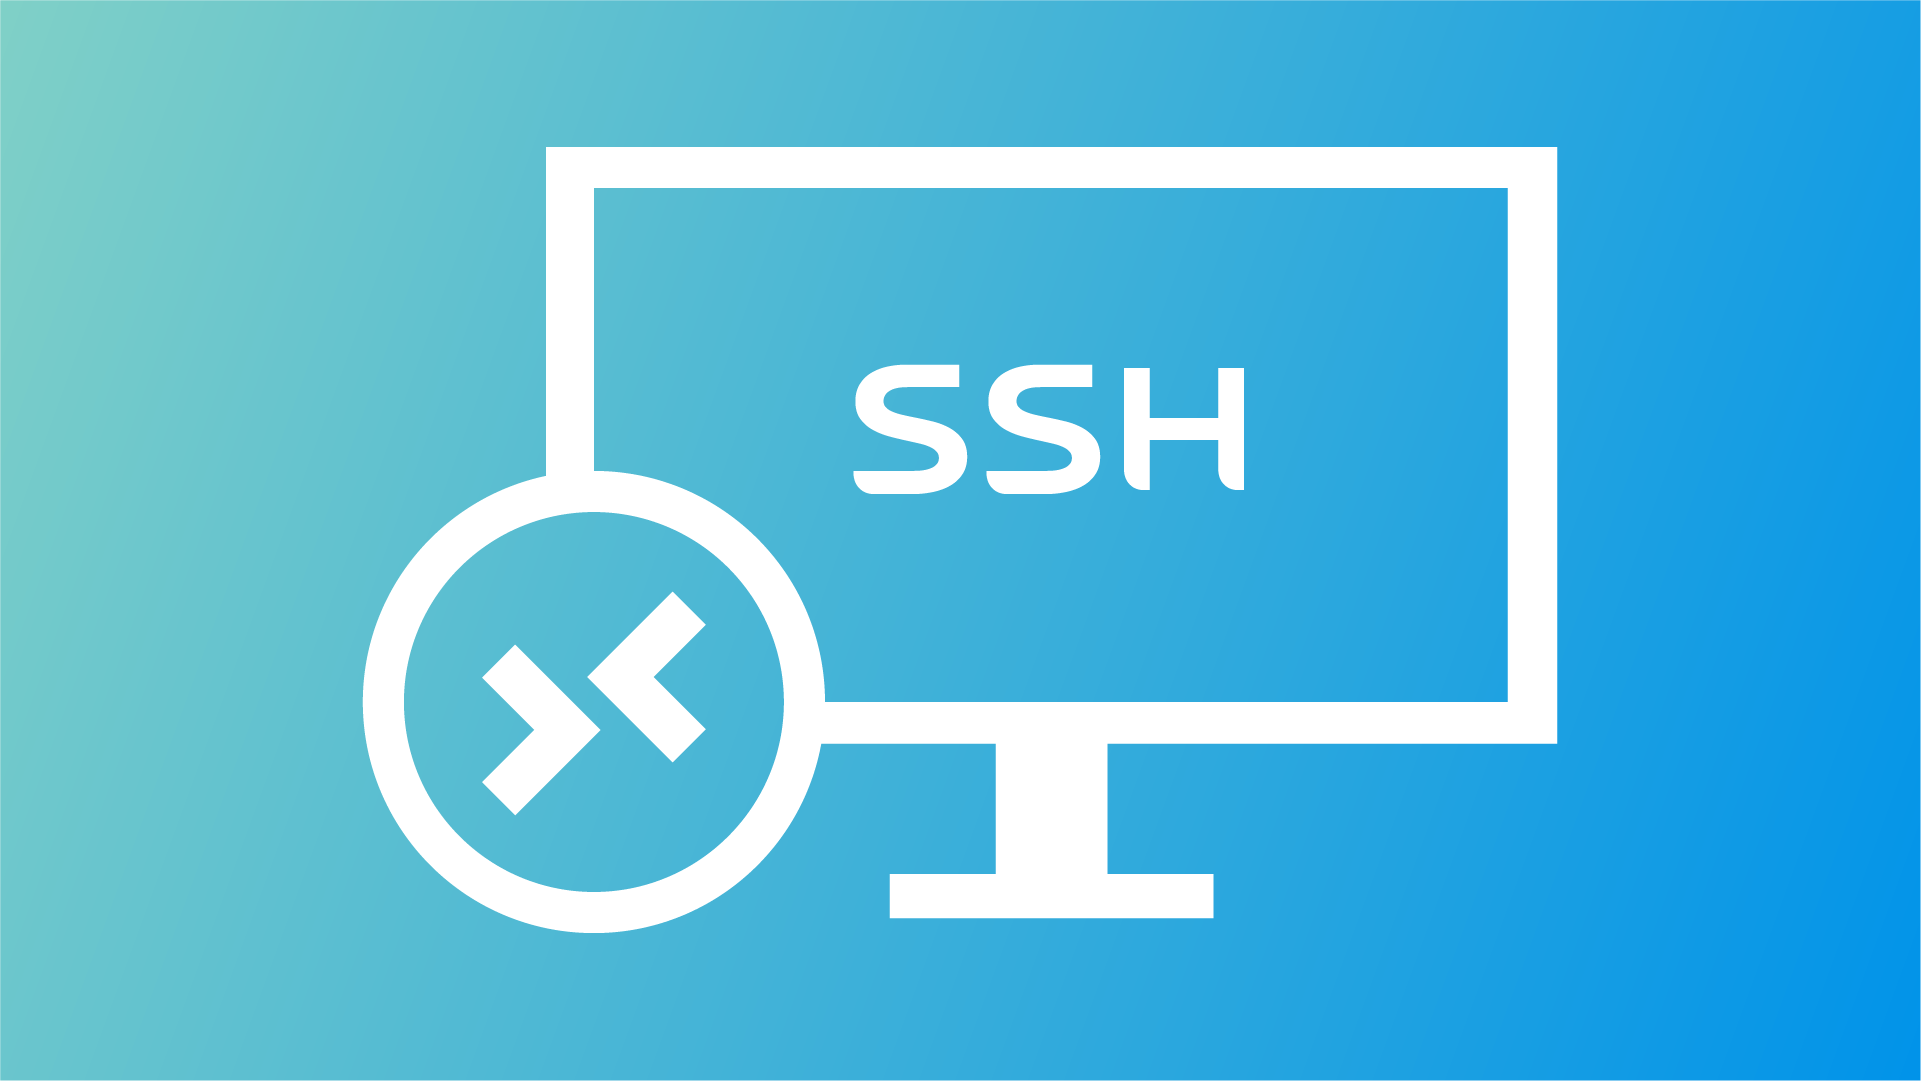 7 Tips to Speed Up SSH Connections on Linux, Windows, and Mac - Linovox